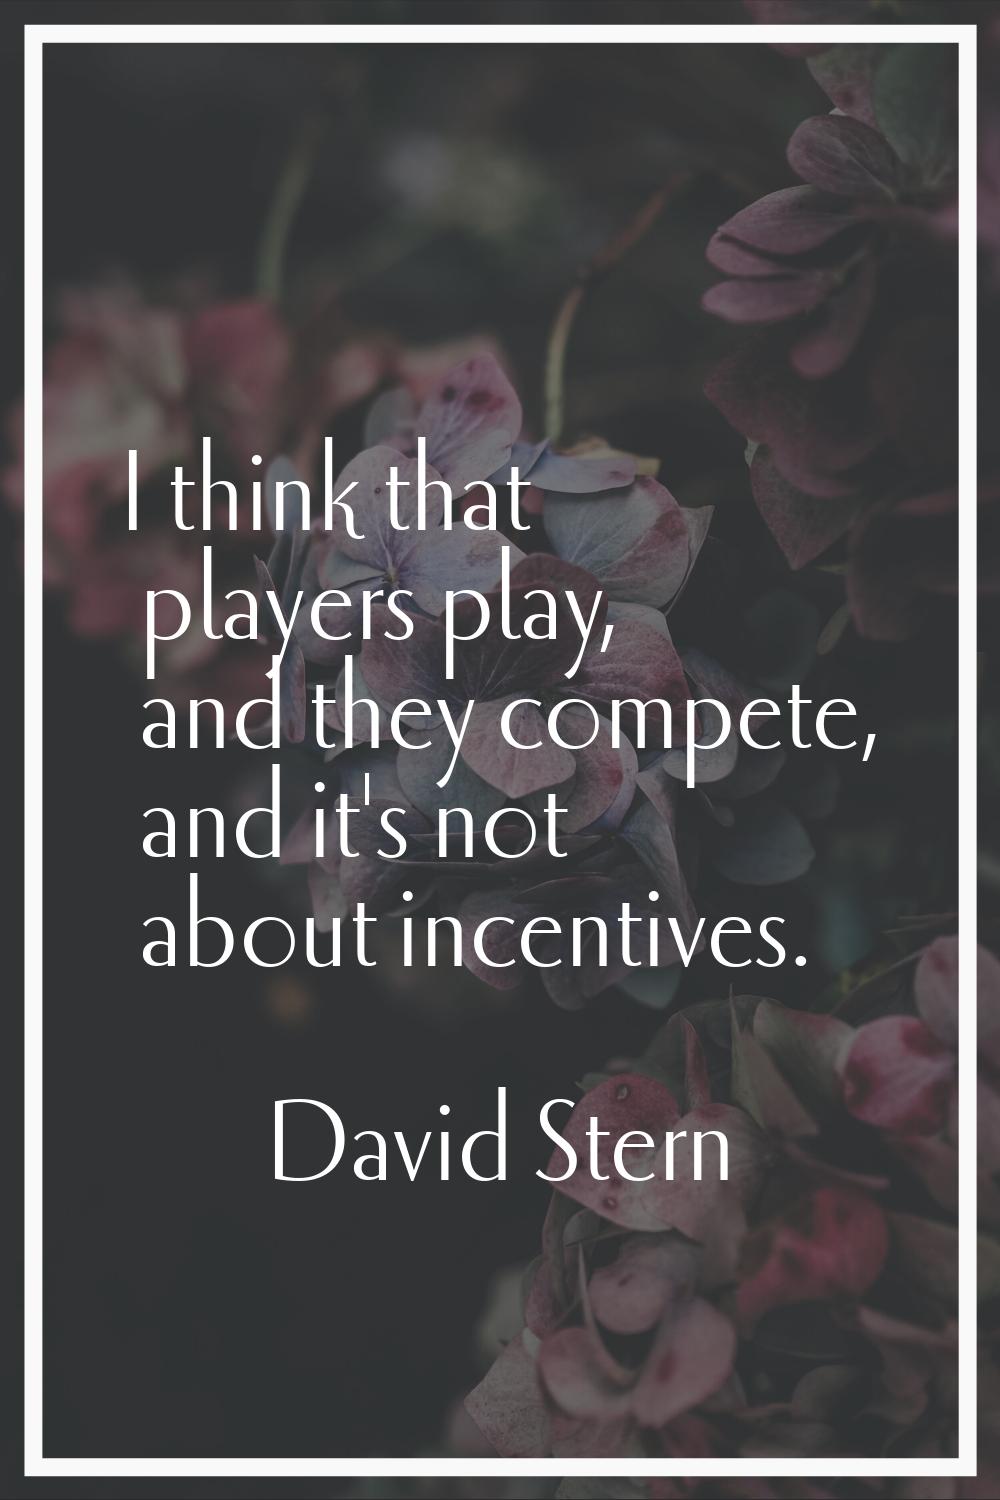 I think that players play, and they compete, and it's not about incentives.